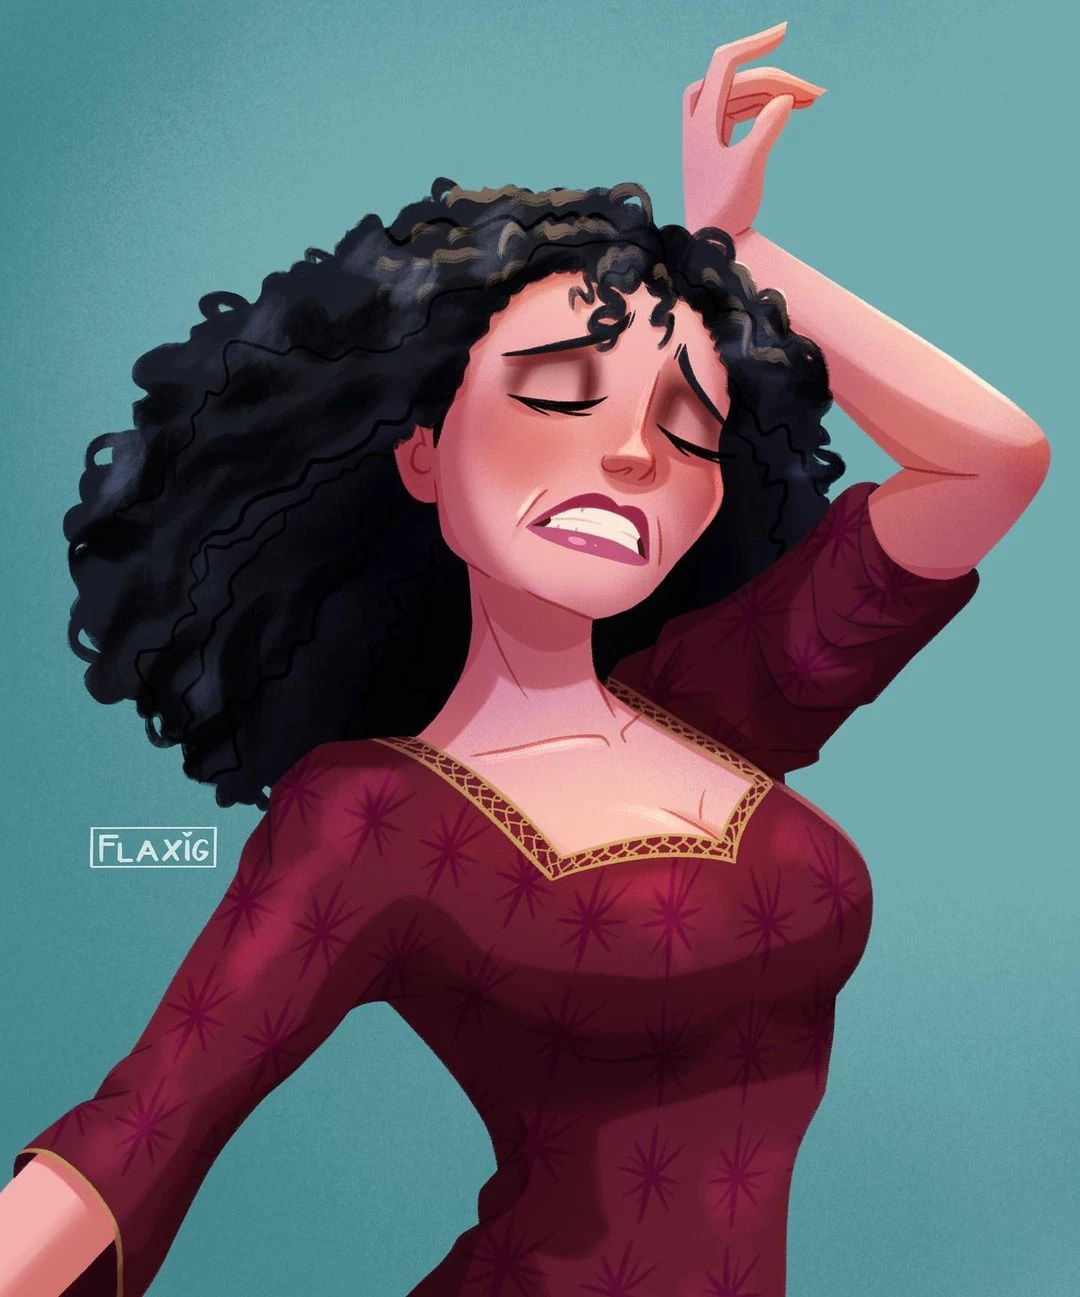 Mother Gothel’s Damsel-In-Distress Pose (Tangled)